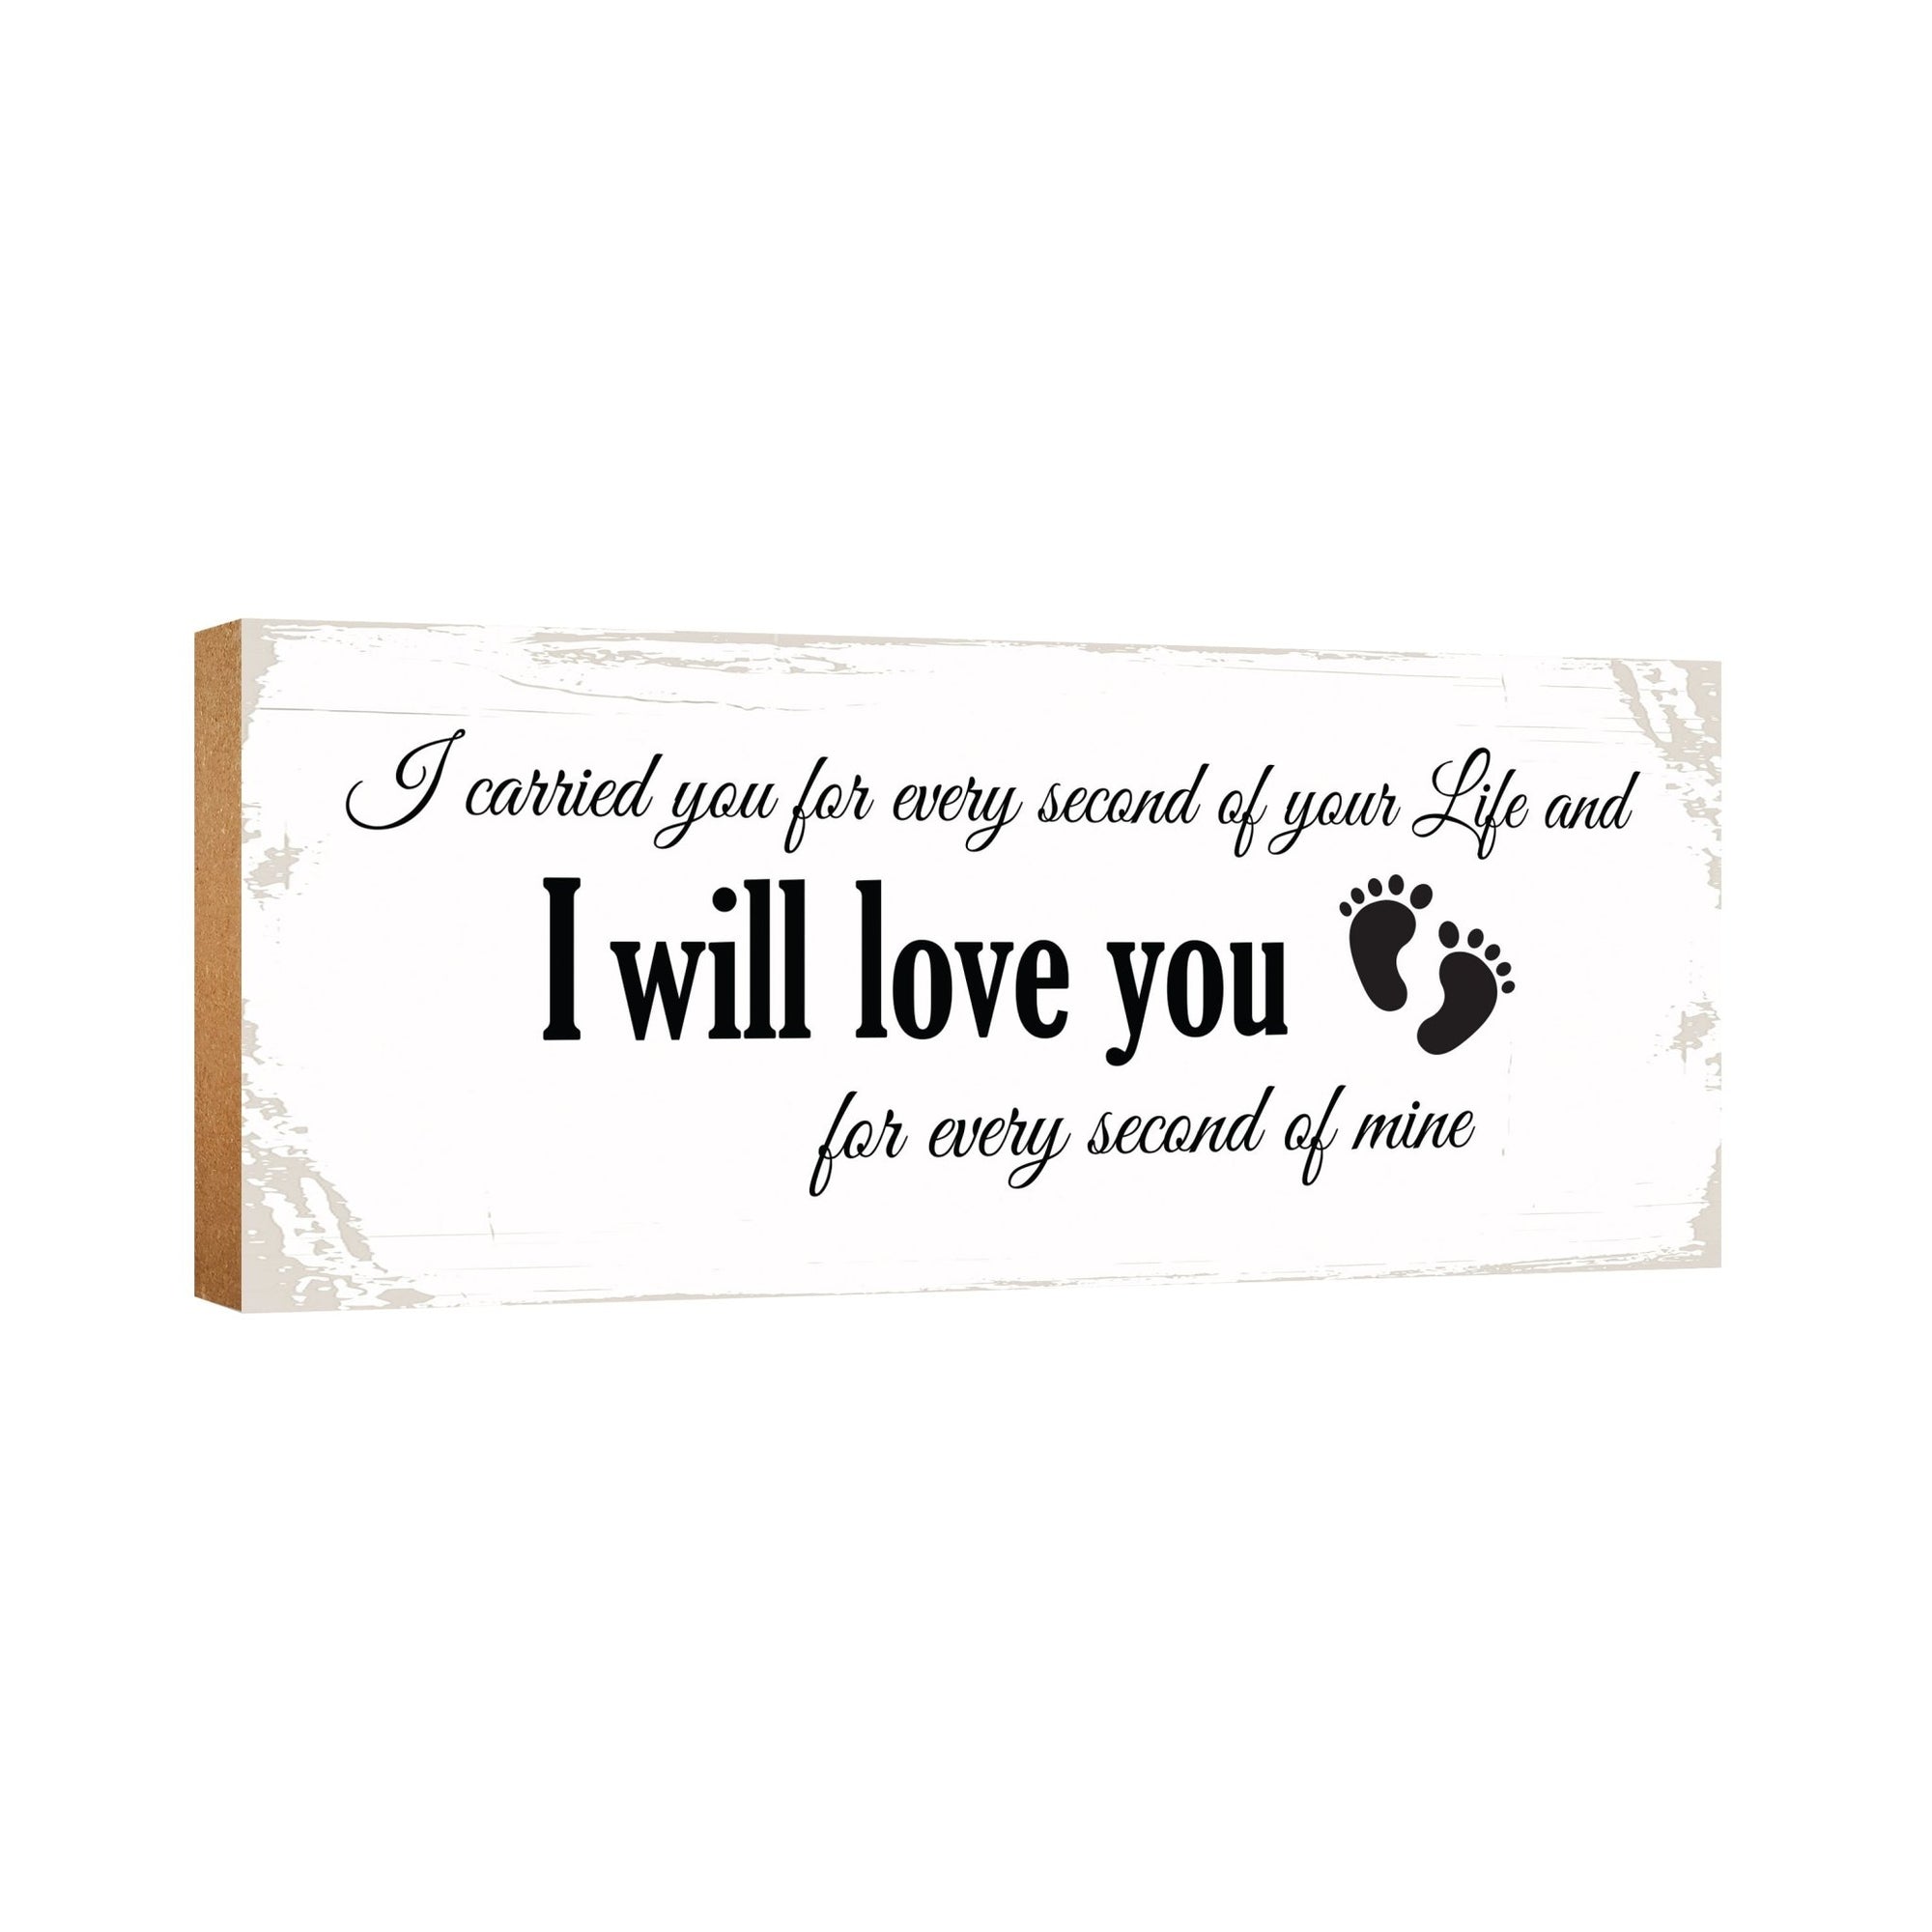 Modern Inspirational Pet Memorial 4x10 inches Wooden Sign (I Will Love You) Tabletop Plaque Home Decoration Loss of Pet Bereavement Sympathy Keepsake - LifeSong Milestones